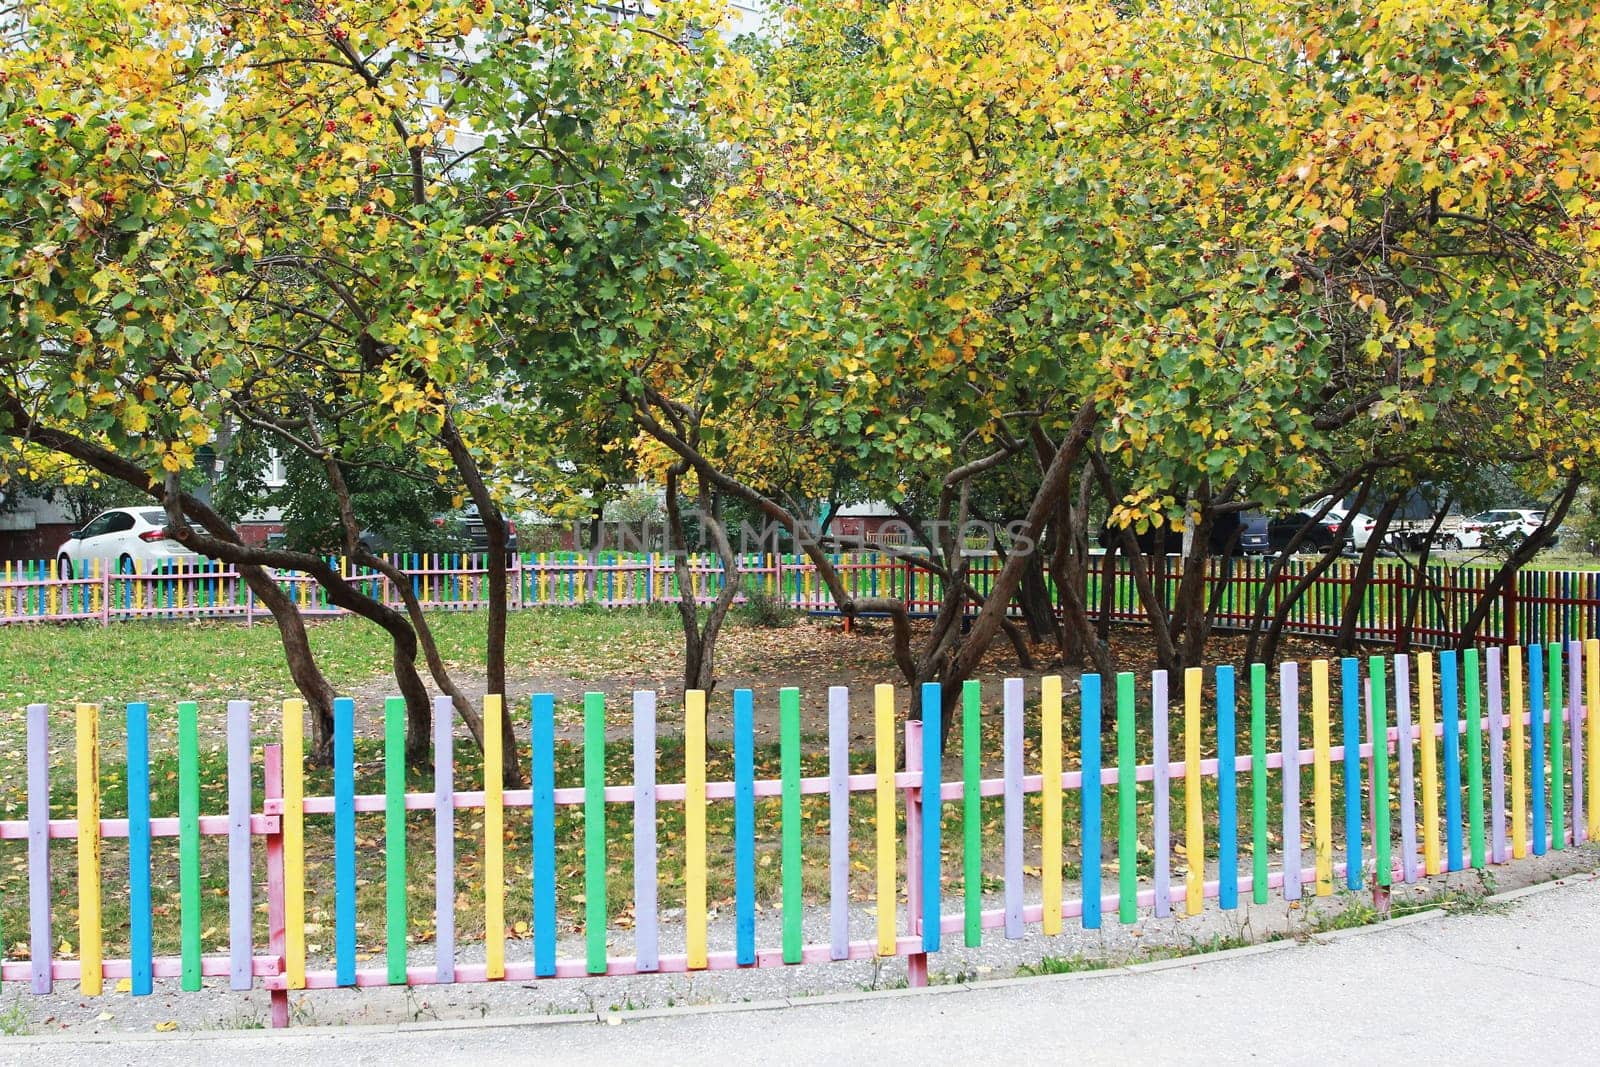 Photo a lawn fenced with colorful wooden fences with growing fruit trees. The yard of the house.